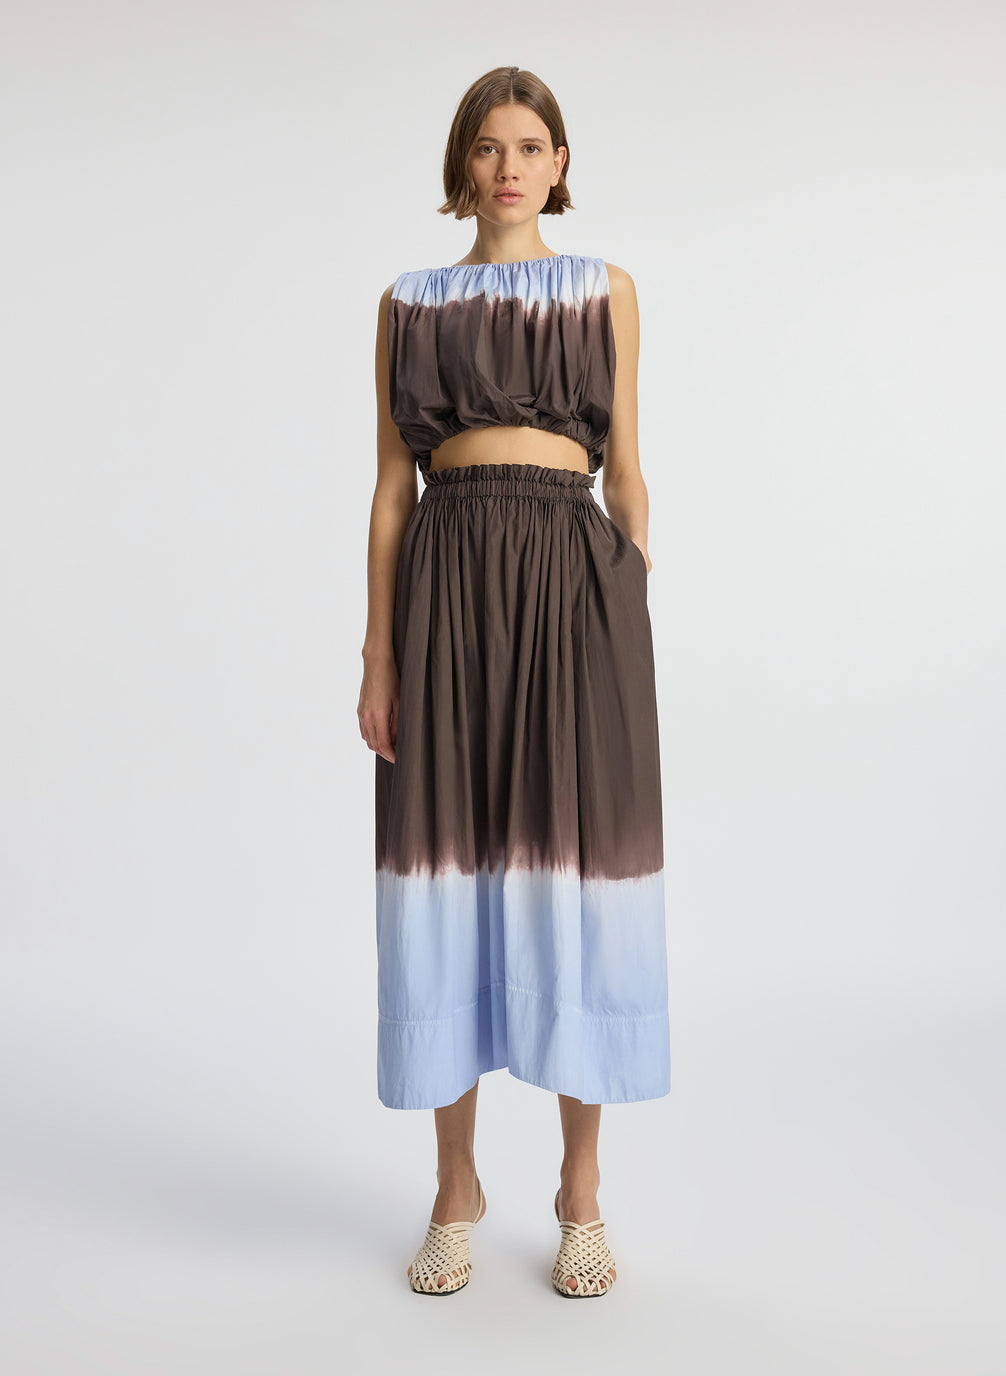 front view of woman wearing light blue and brown dip dyed sleeveless top and matching midi skirt